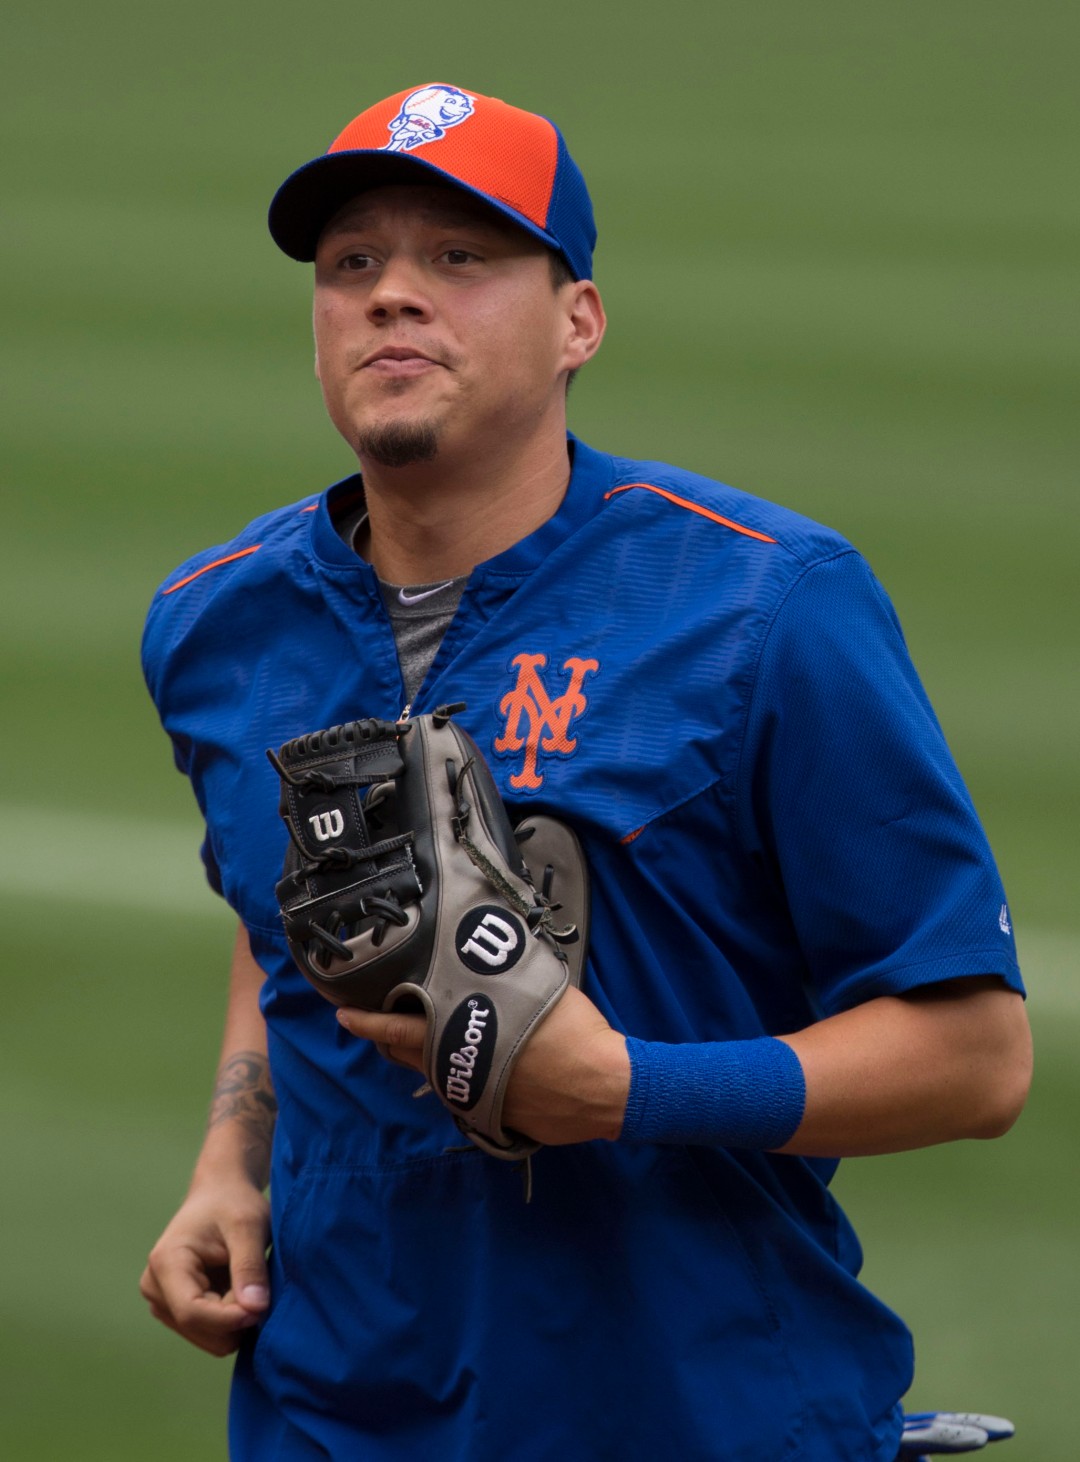 The Giants Mets Wilmer Flores getting some sprints in before a baseball game